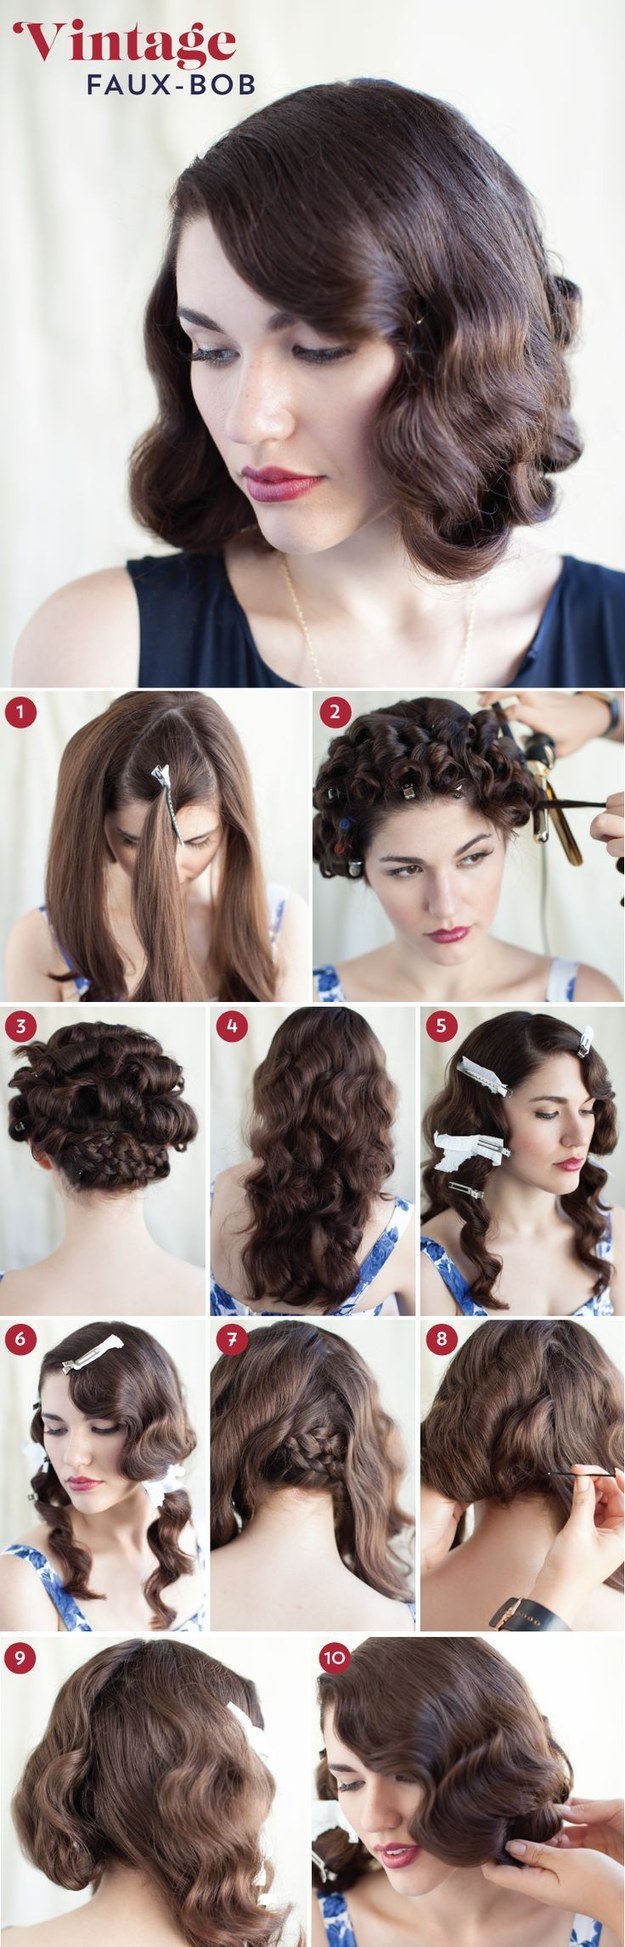 32 Vintage Hairstyle Tutorials You Should Not Miss Styles